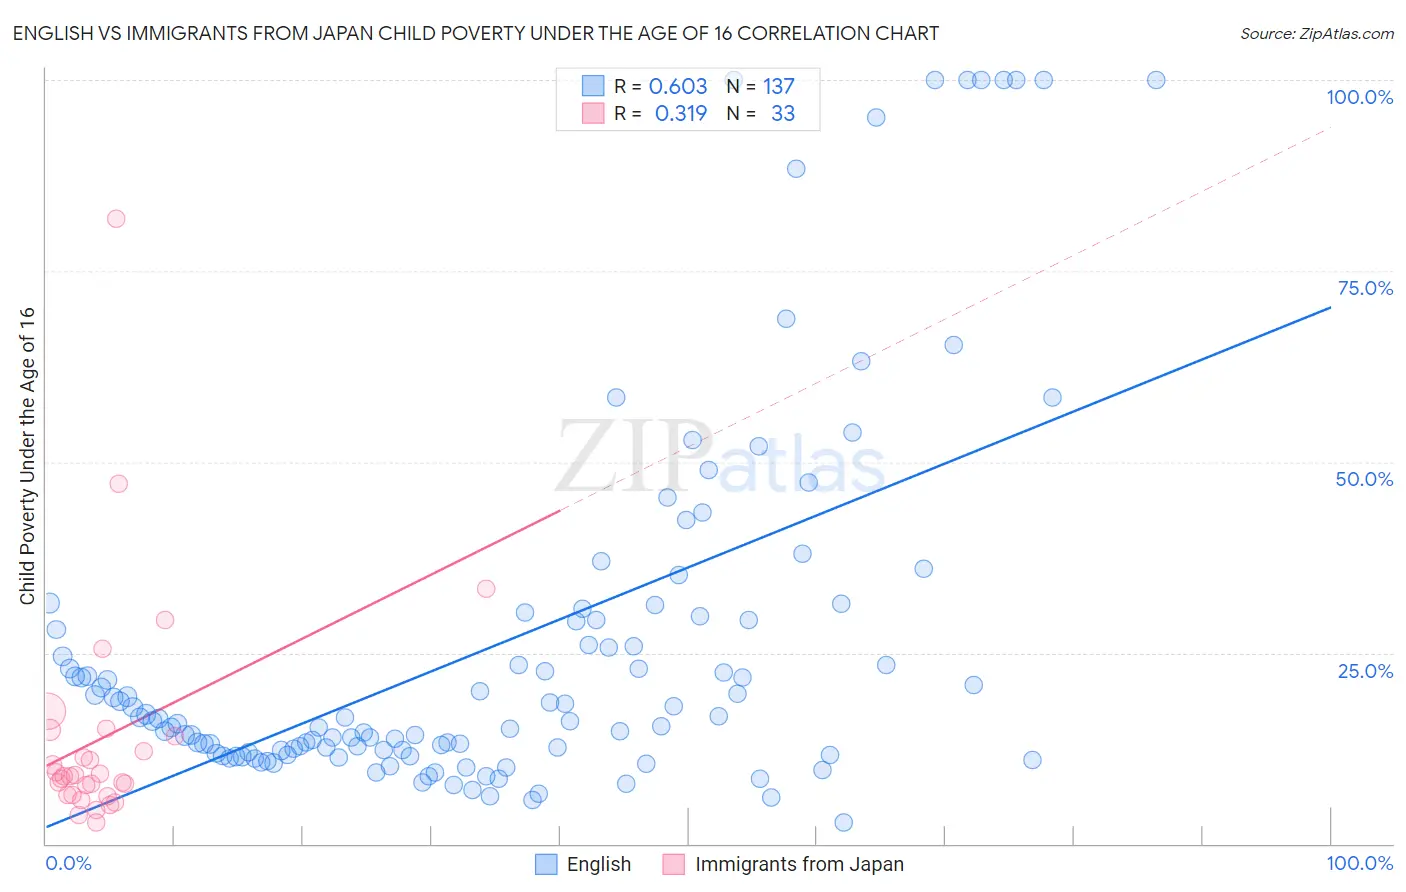 English vs Immigrants from Japan Child Poverty Under the Age of 16